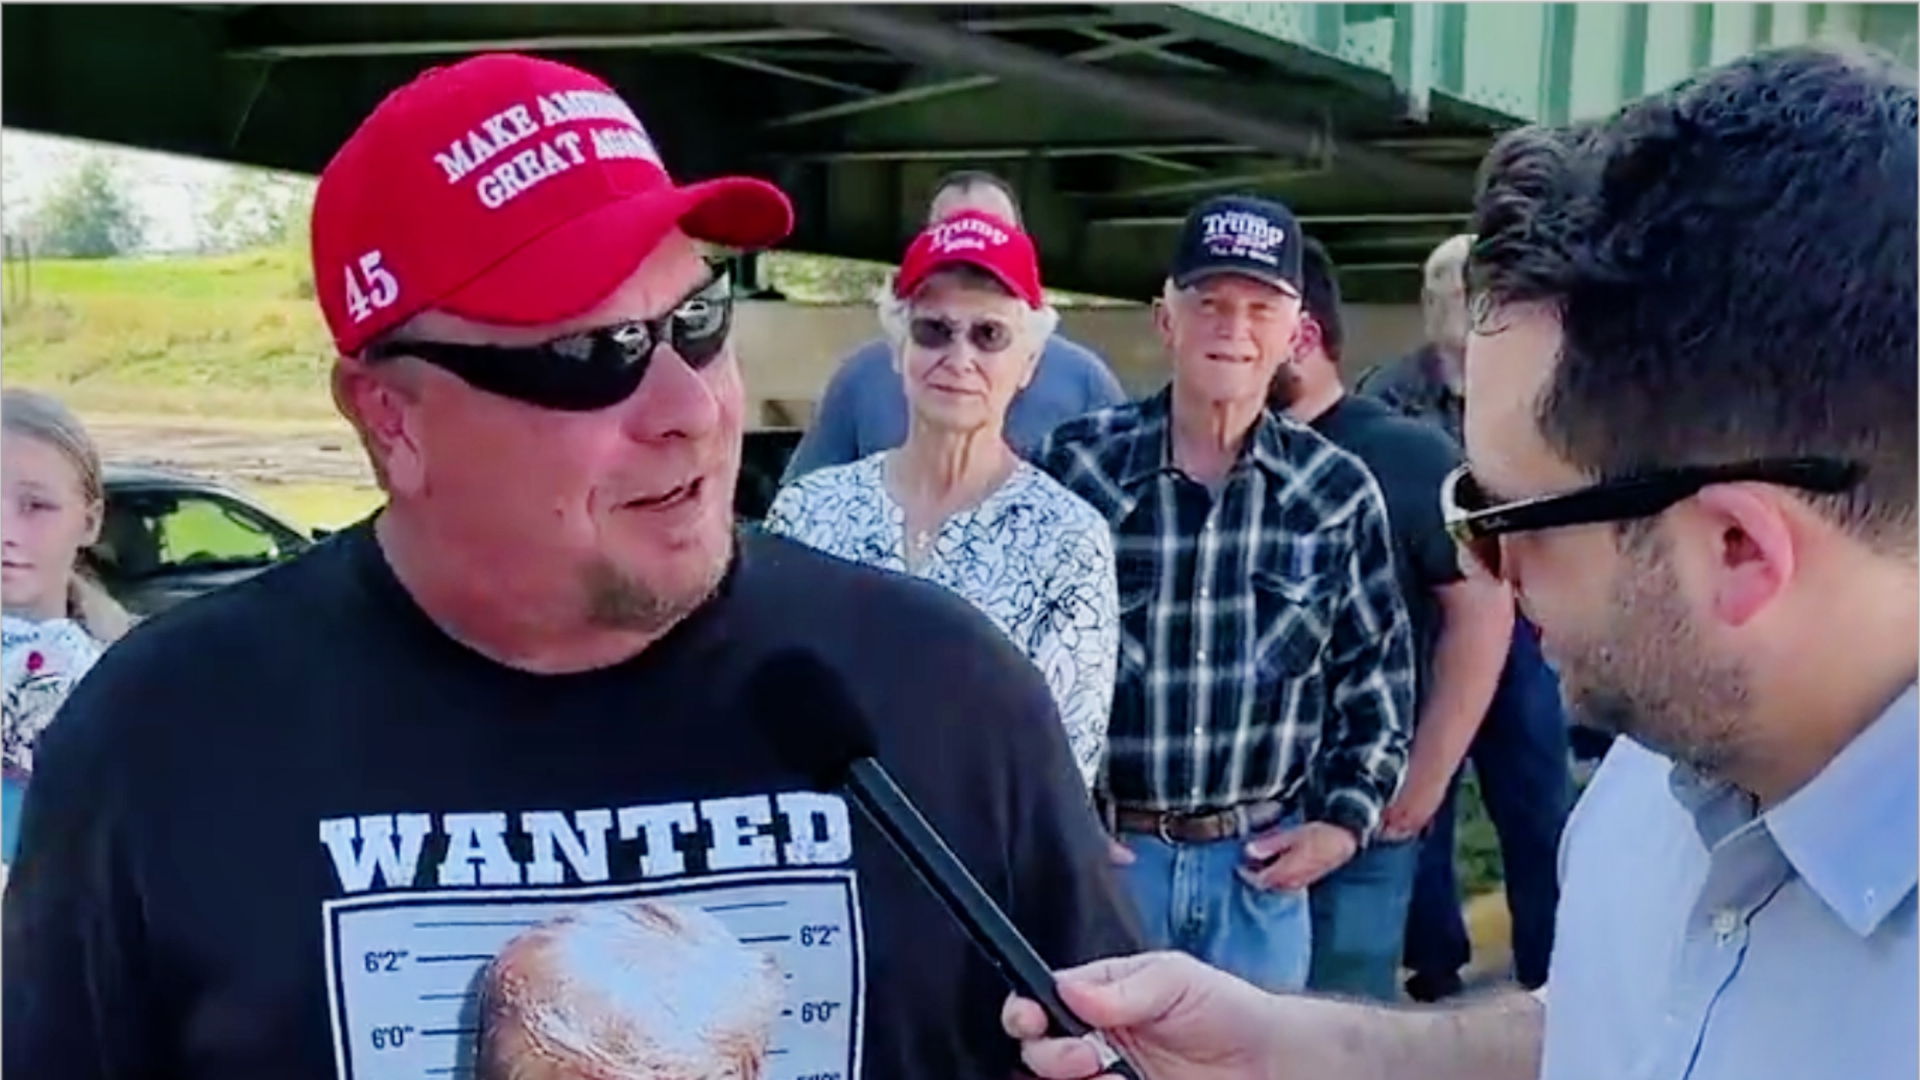 ‘That’s Literally a Picture of Him Surrendering!’ Trump Fan Confronted Outside Rally Over His ‘Never Surrender’ T-Shirt (mediaite.com)